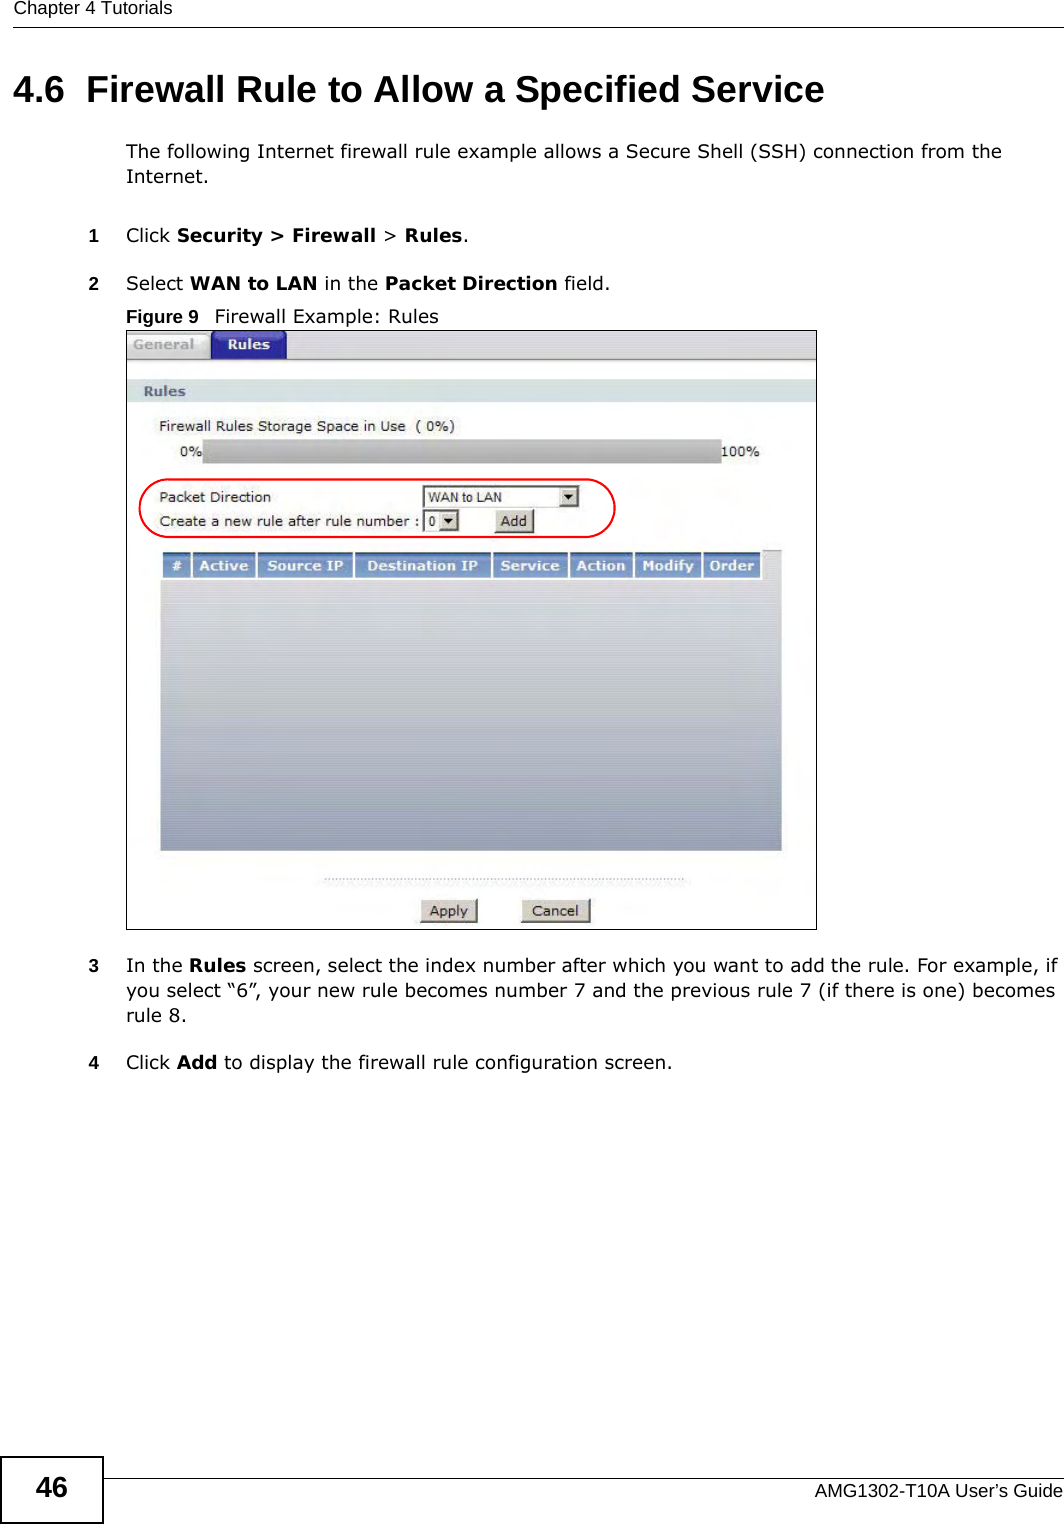 Chapter 4 TutorialsAMG1302-T10A User’s Guide464.6  Firewall Rule to Allow a Specified ServiceThe following Internet firewall rule example allows a Secure Shell (SSH) connection from the Internet.1Click Security &gt; Firewall &gt; Rules.2Select WAN to LAN in the Packet Direction field. Figure 9   Firewall Example: Rules3In the Rules screen, select the index number after which you want to add the rule. For example, if you select “6”, your new rule becomes number 7 and the previous rule 7 (if there is one) becomes rule 8.4Click Add to display the firewall rule configuration screen.